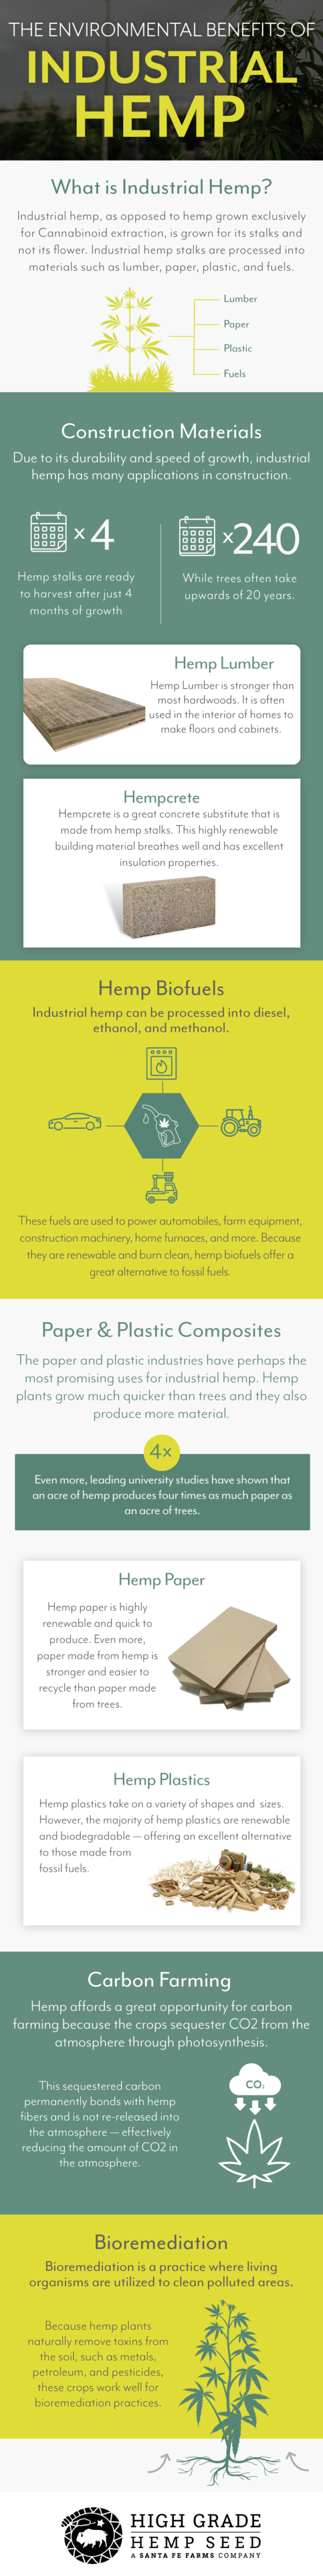 The Environmental Benefits of Industrial Hemp (Infographic)